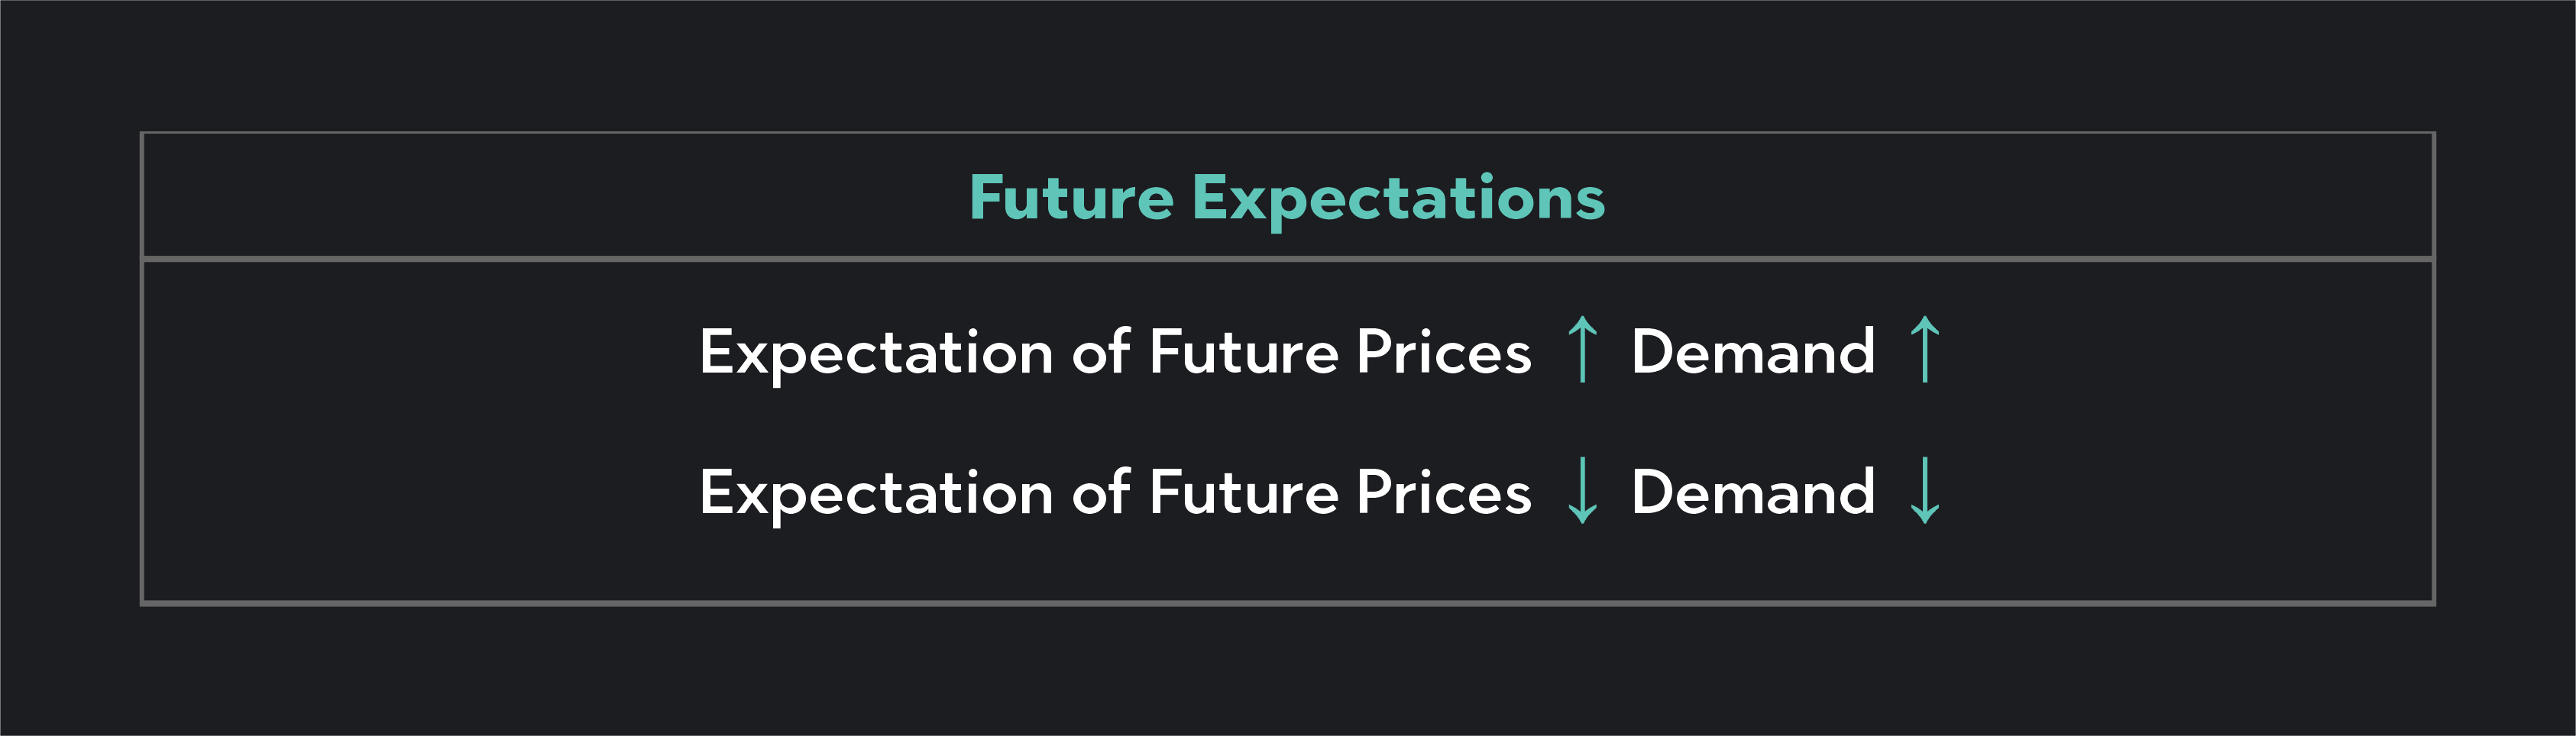 Graph showing how demand and expectation of future prices affect each other